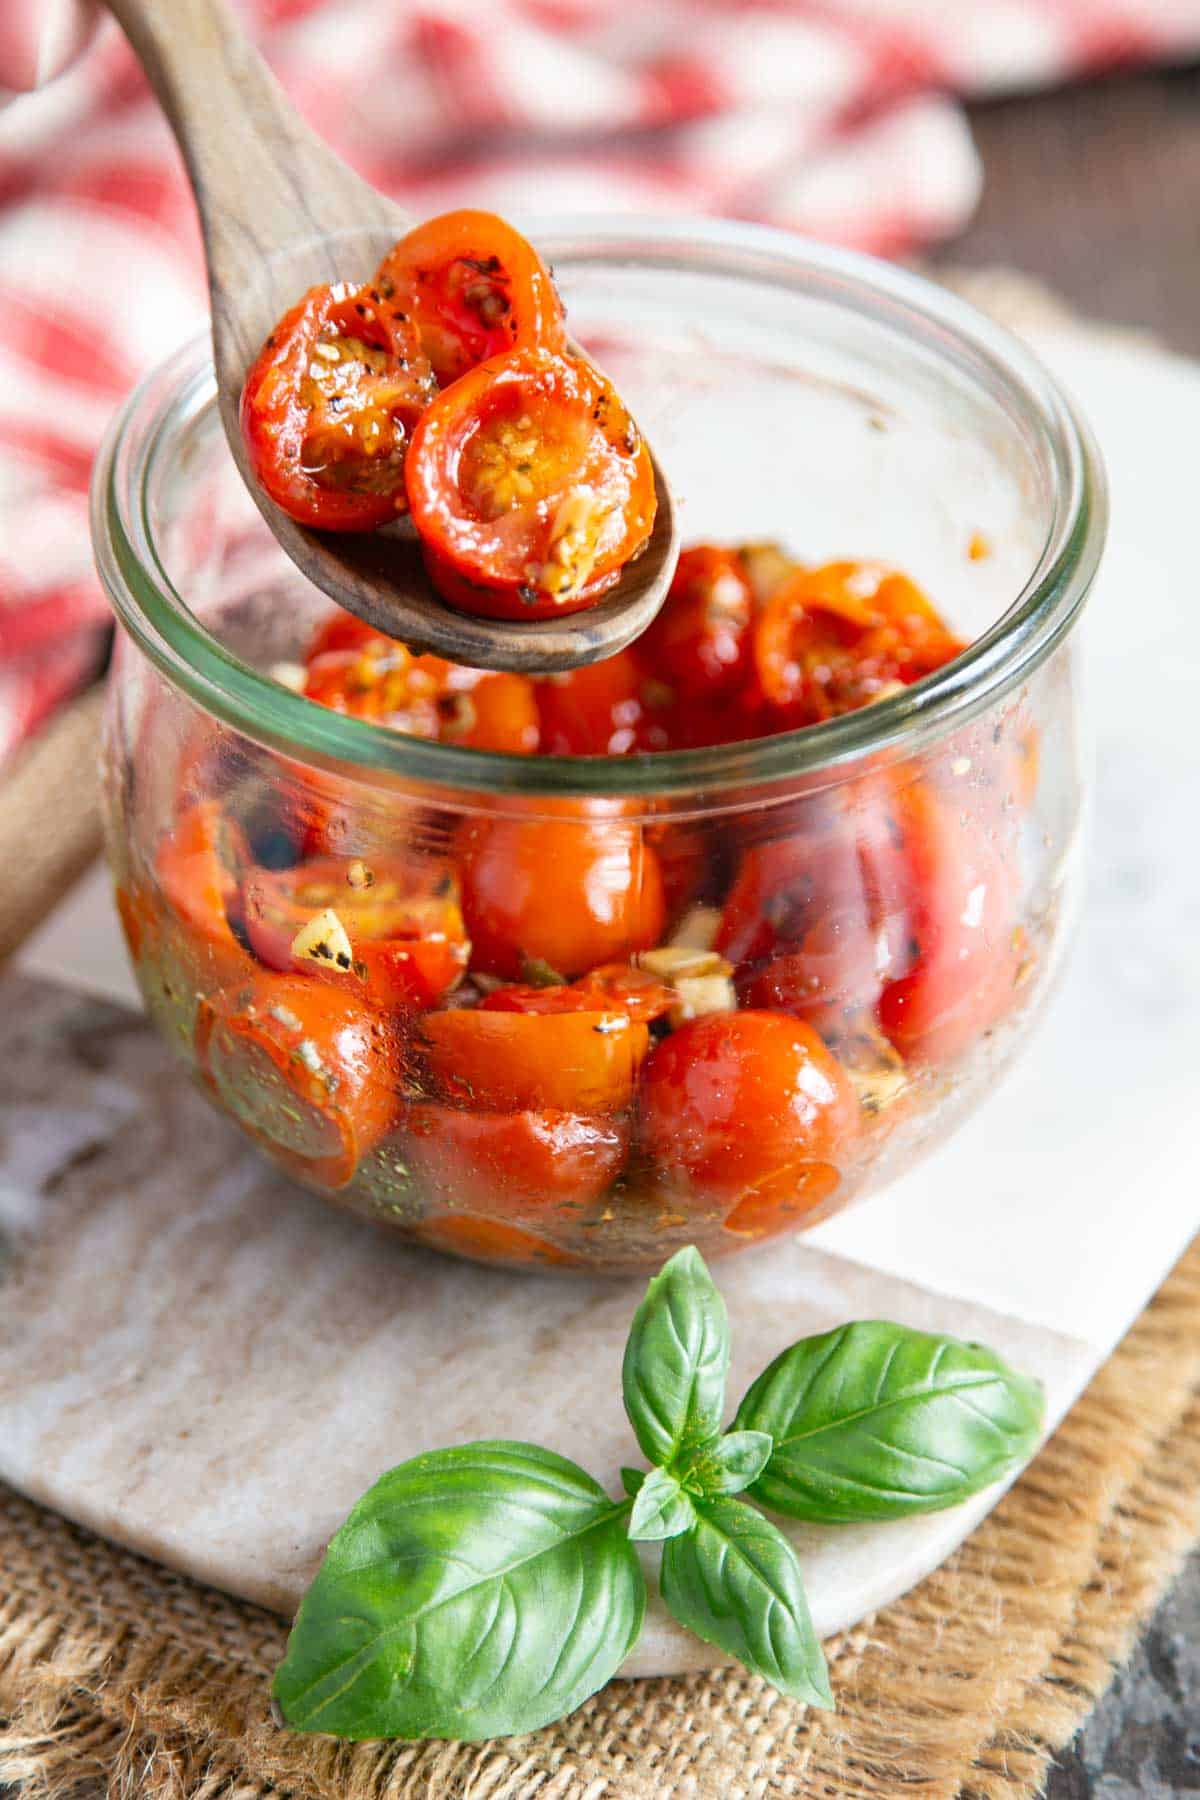 Lifting delicious confit cherry tomatoes from the jar with a spoon.